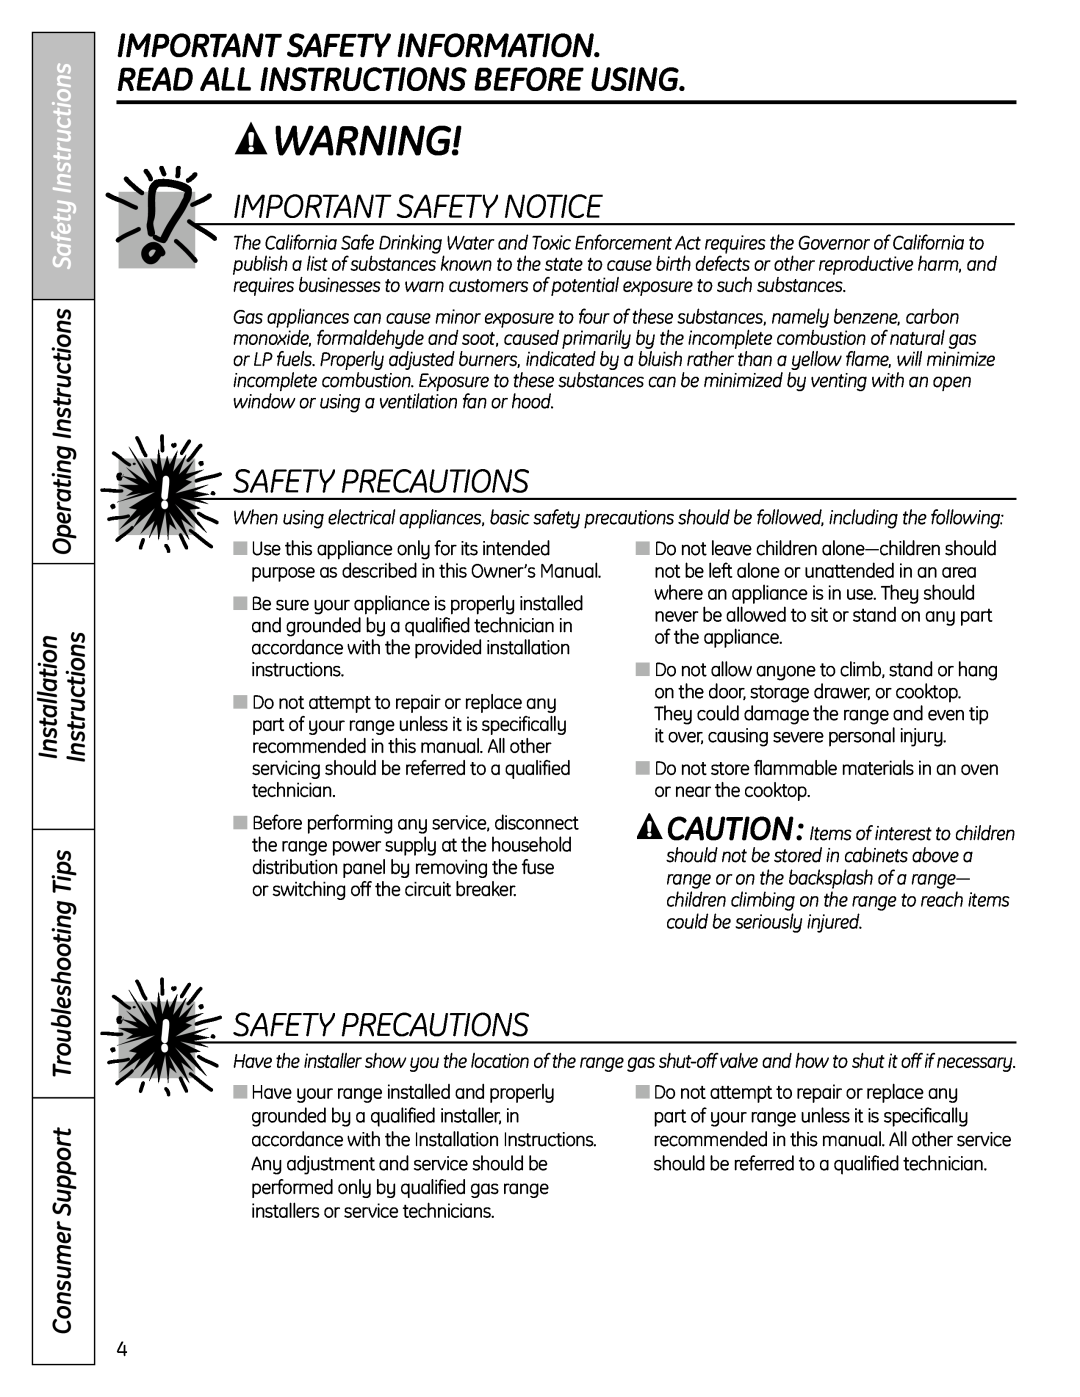 GE C2S980 Important Safety Information, Read All Instructions Before Using, Importantsafety Notice, Safety Precautions 